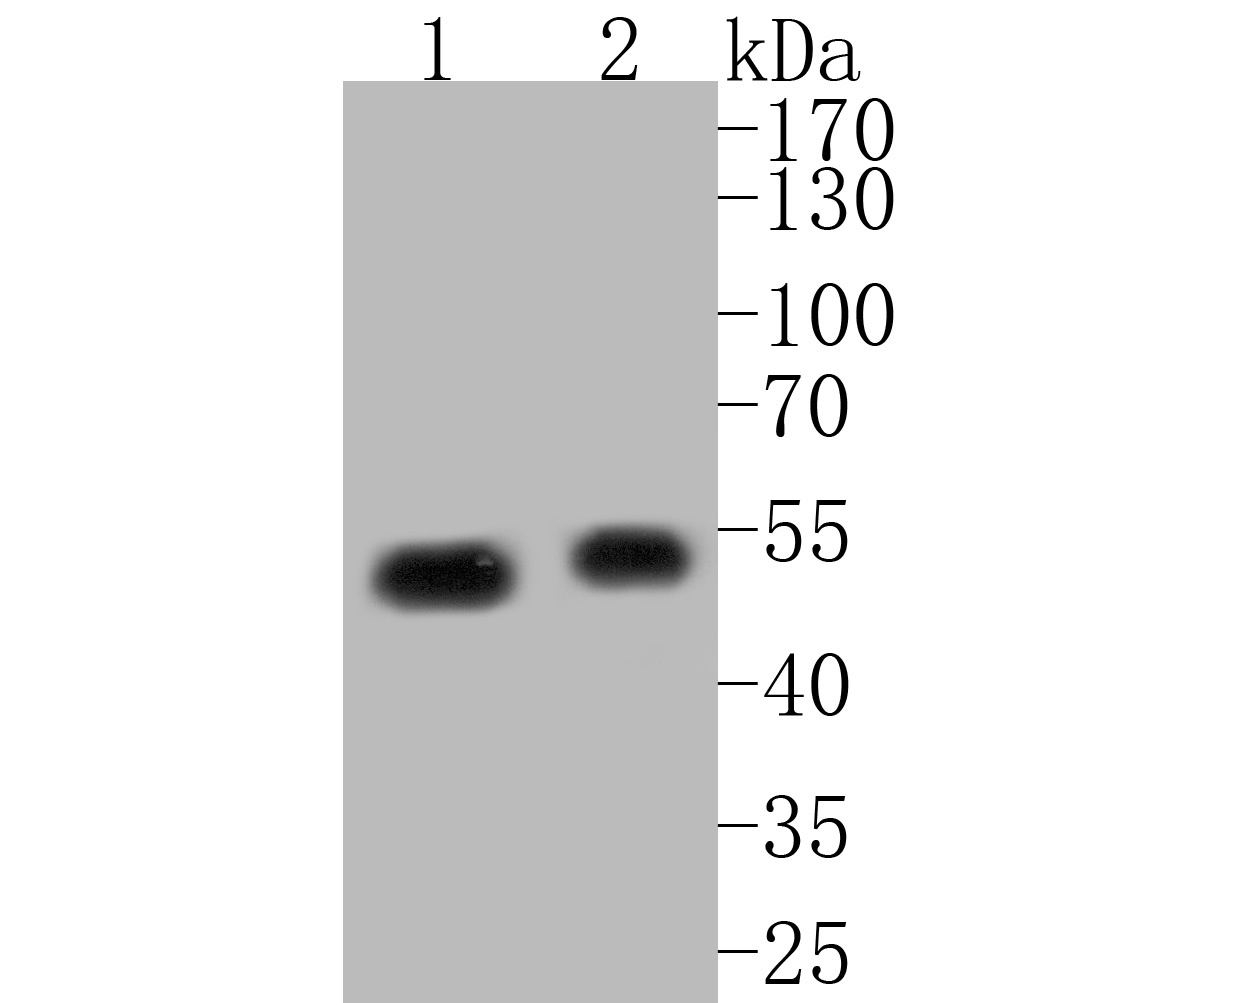 Western blot analysis of Elongation factor 1-gamma on different lysates. Proteins were transferred to a PVDF membrane and blocked with 5% BSA in PBS for 1 hour at room temperature. The primary antibody (ET7110-45, 1/500) was used in 5% BSA at room temperature for 2 hours. Goat Anti-Rabbit IgG - HRP Secondary Antibody (HA1001) at 1:5,000 dilution was used for 1 hour at room temperature.<br />
Positive control: <br />
Lane 1: MCF-7 cell lysate<br />
Lane 2: K562 cell lysate